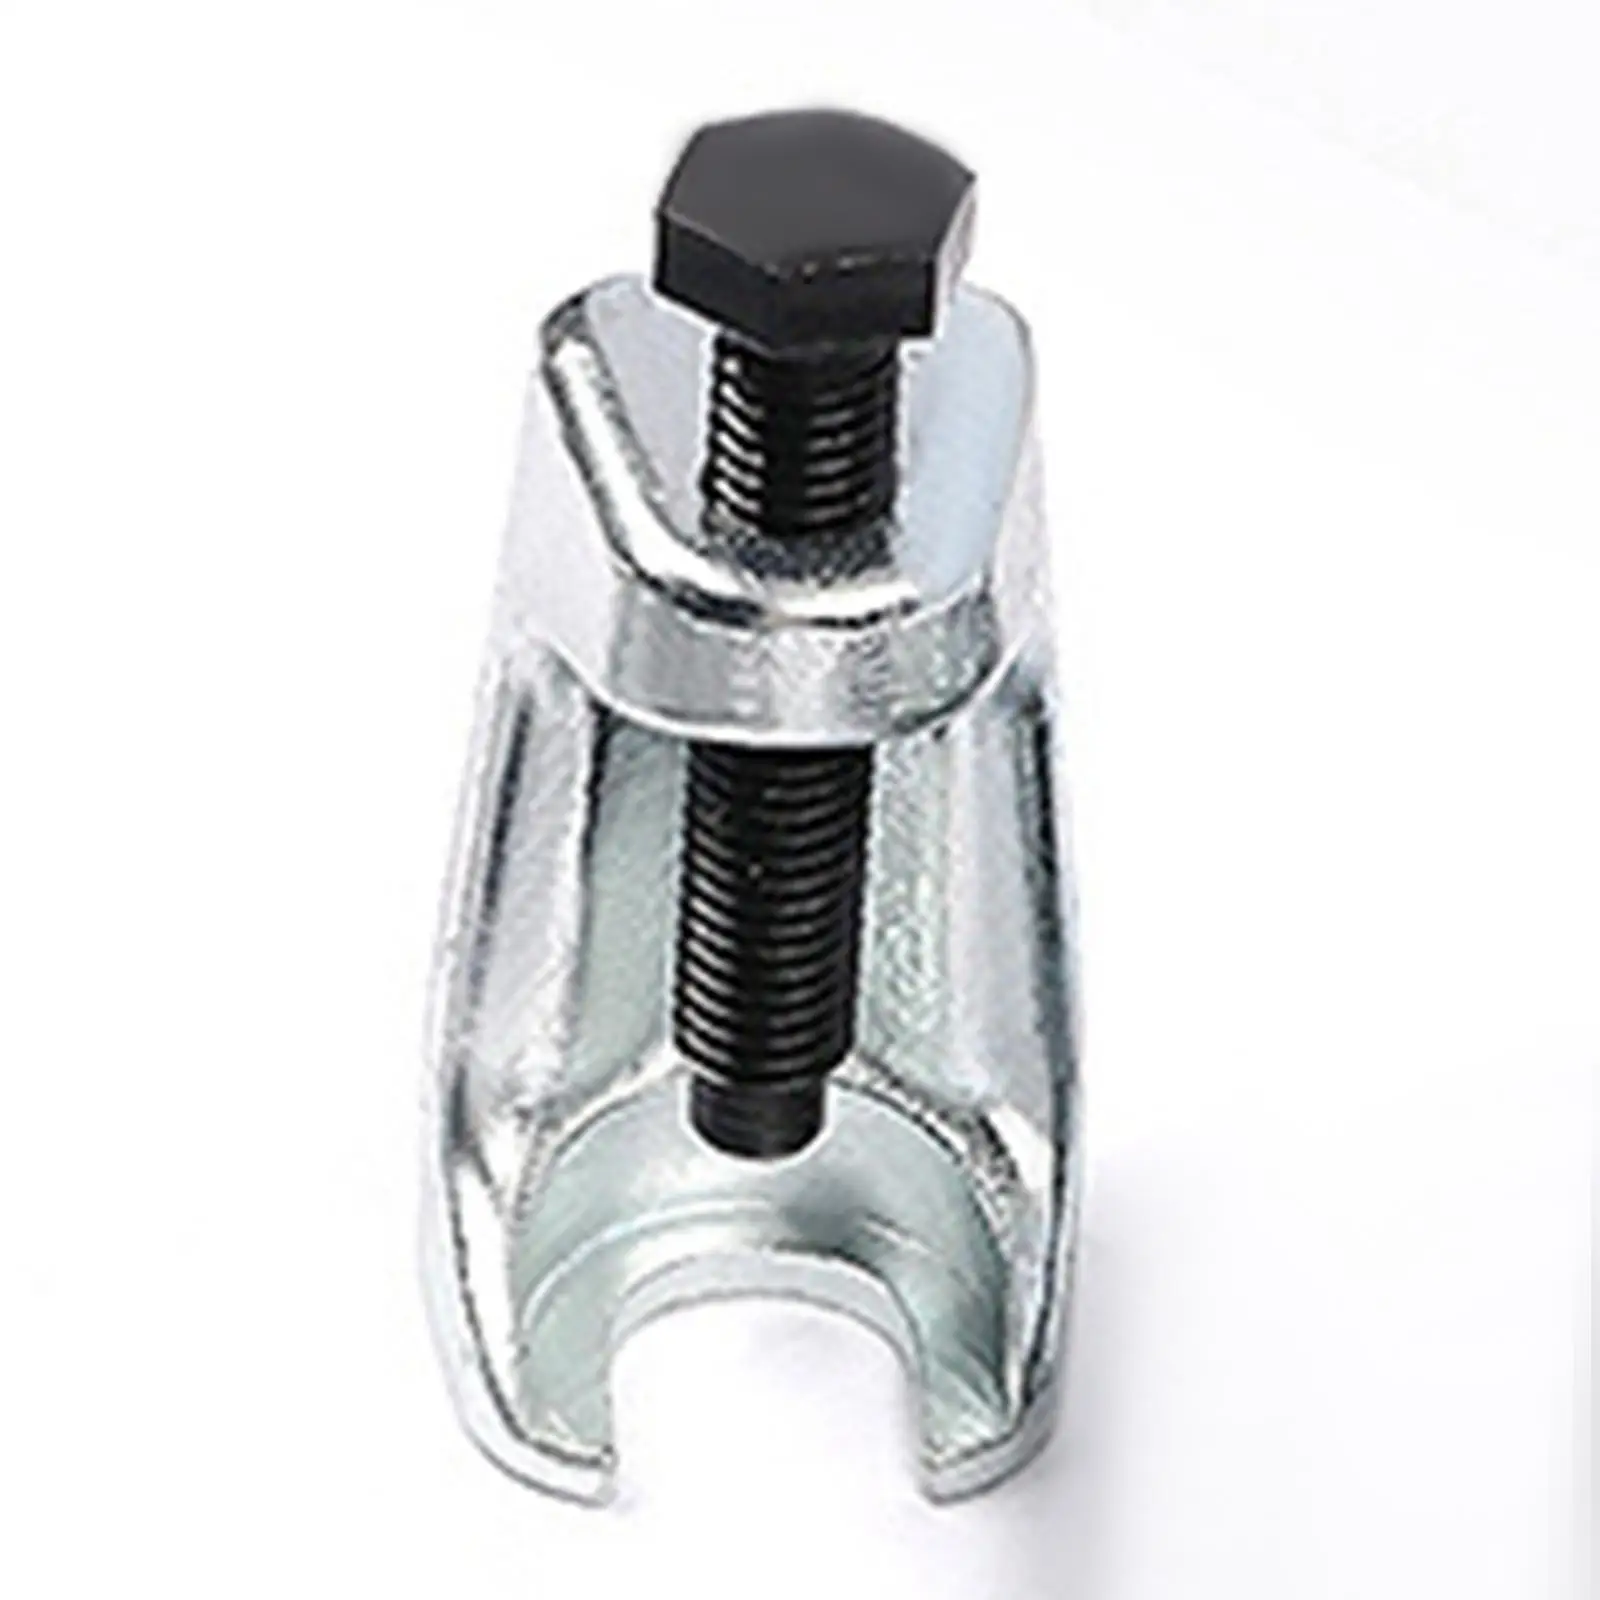 Automotive Ball Joint Separator Tie Rod End Puller Extractor Pitman Arm Puller Steel Splitter Removal Tool